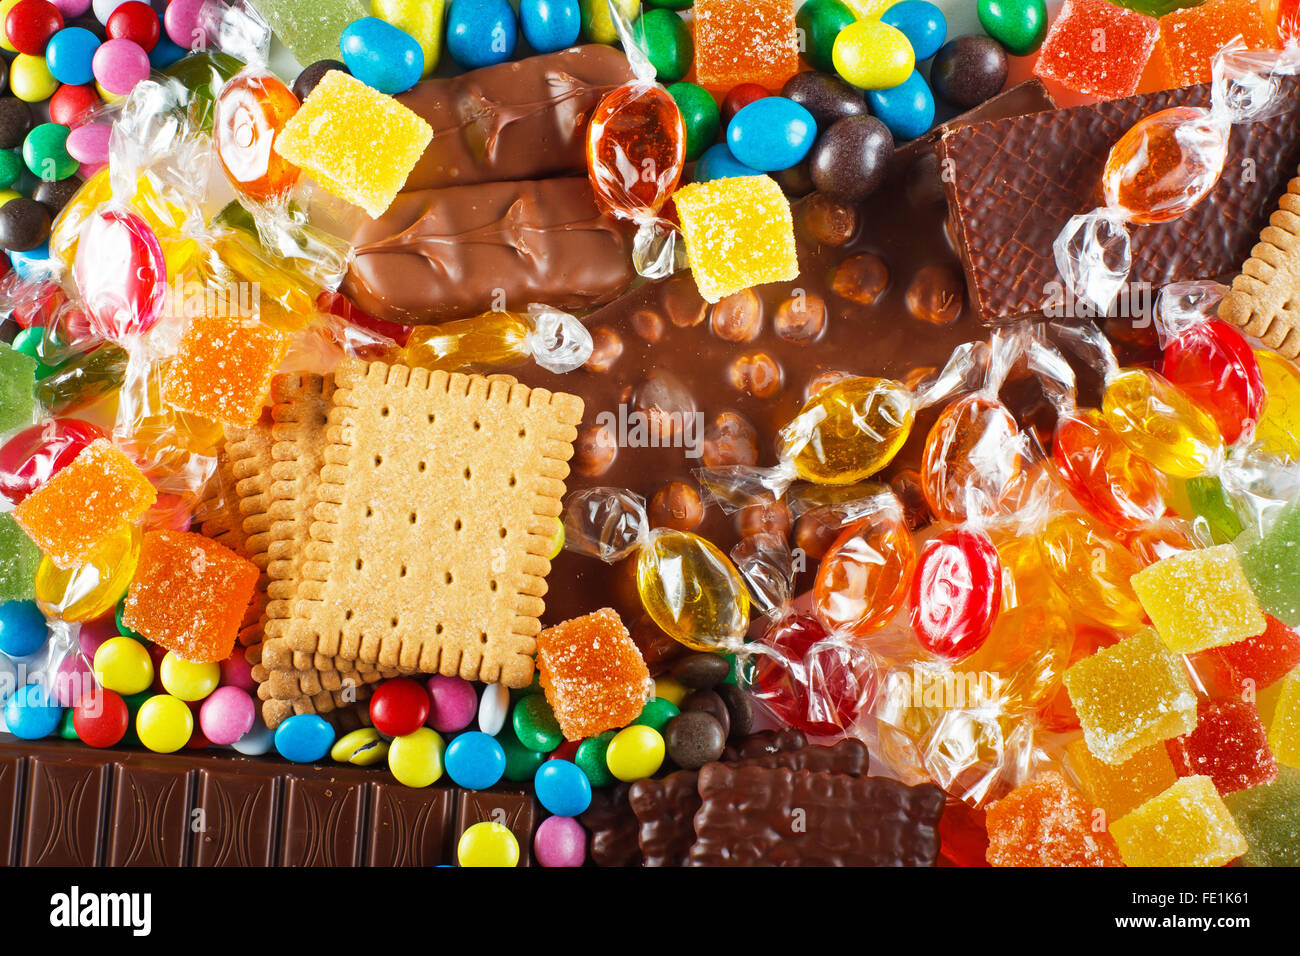 Food concept - candy, chocolate, candy bars, jelly Stock Photo